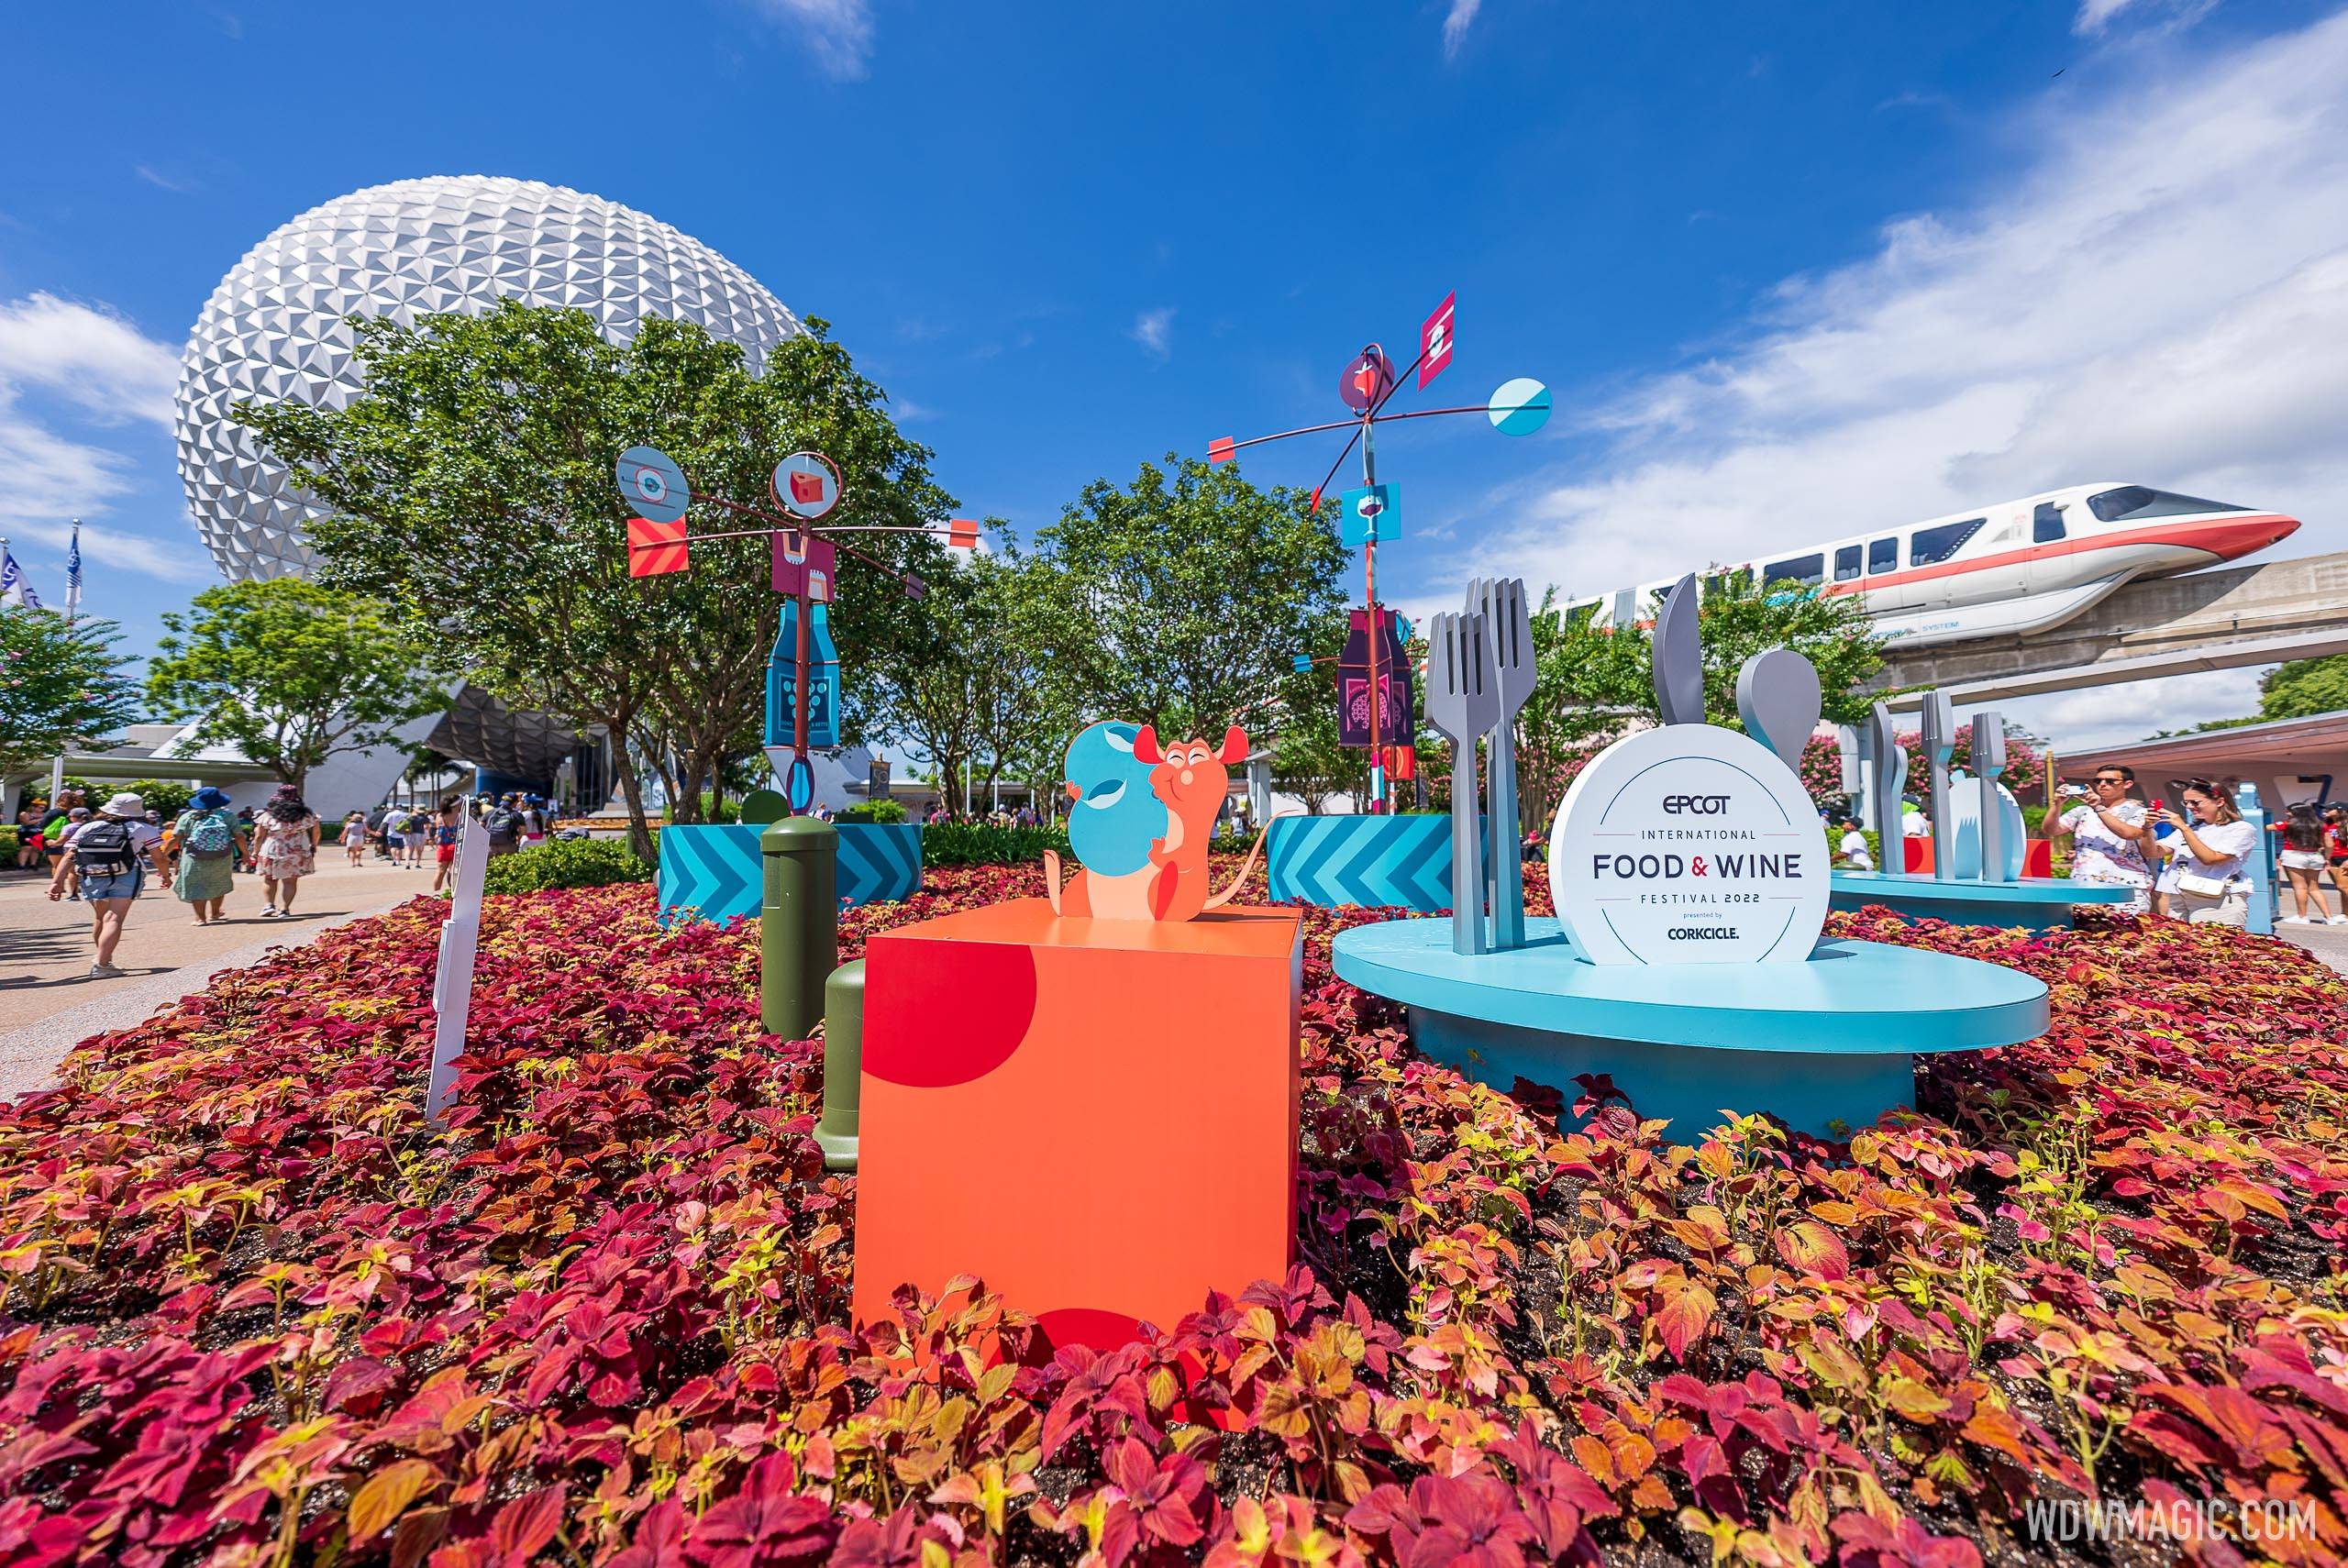 The 2022 EPCOT International Food and Wine Festival gets underway at Walt Disney World